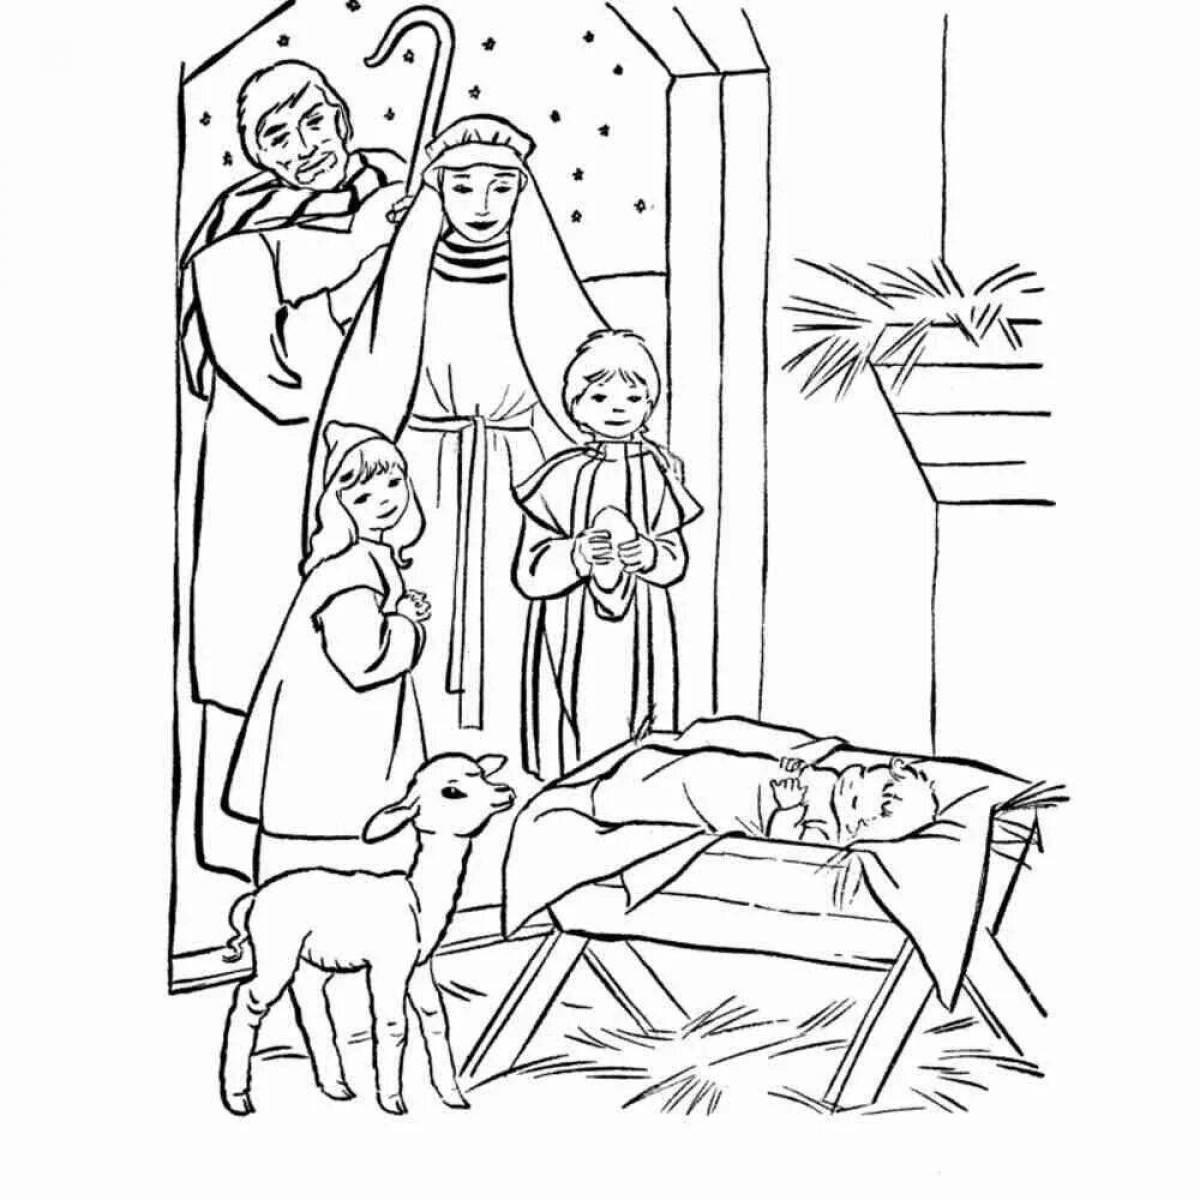 Coloring page shining birth of christ